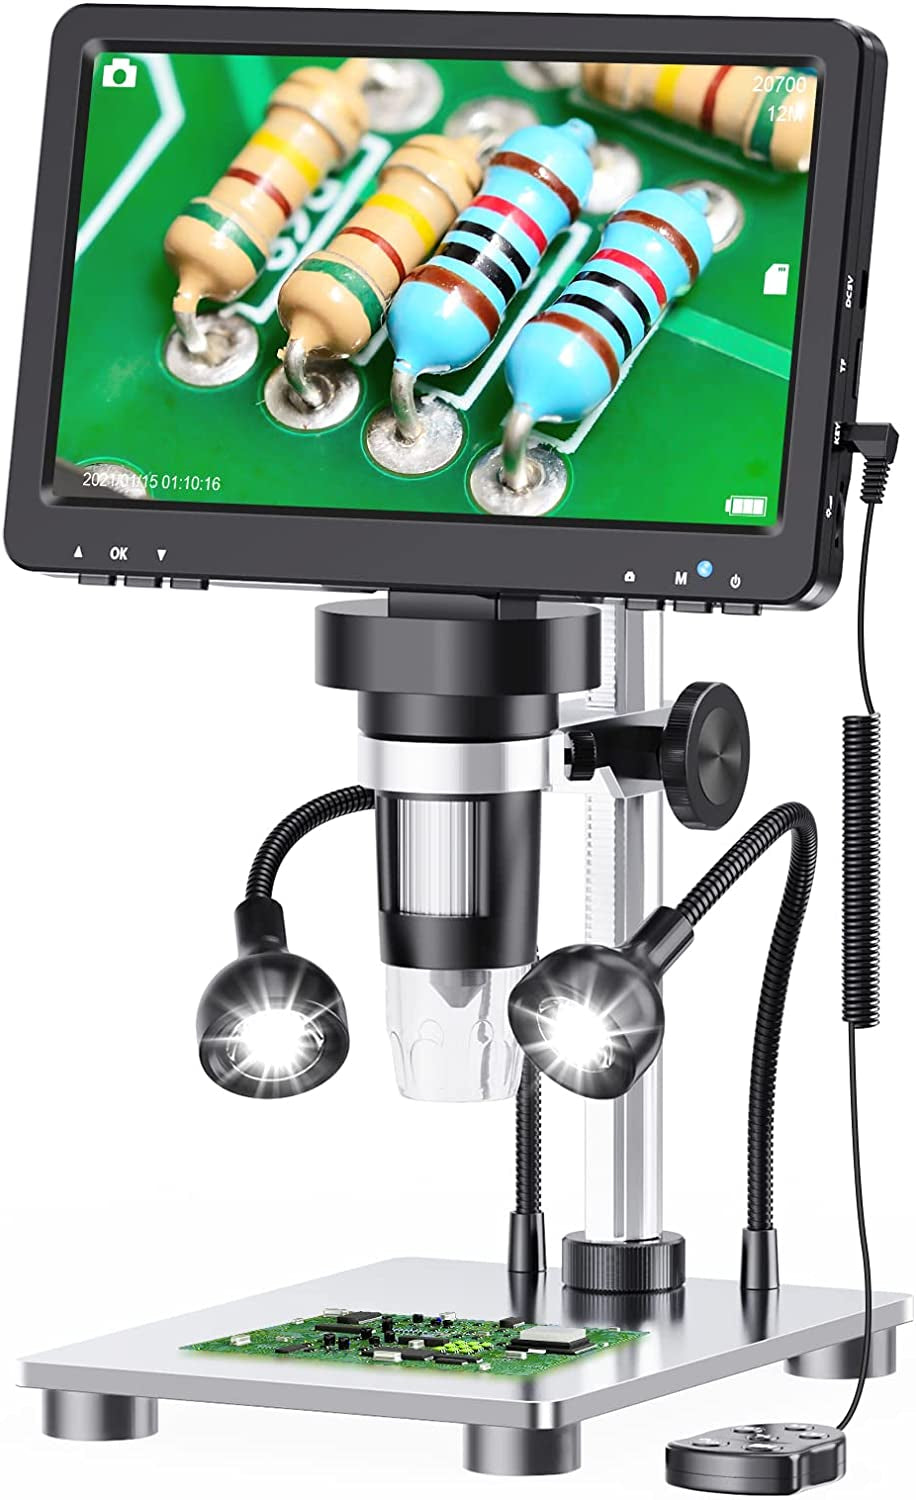 Professional-Grade 7'' LCD Digital Microscope 1200X with 1080P Resolution, 12MP Camera Sensor, Wired Remote, 10 LED Lights and Compatibility with Windows/Mac OS - Ideal for Soldering and Examination of Coins and Electronics for Adults